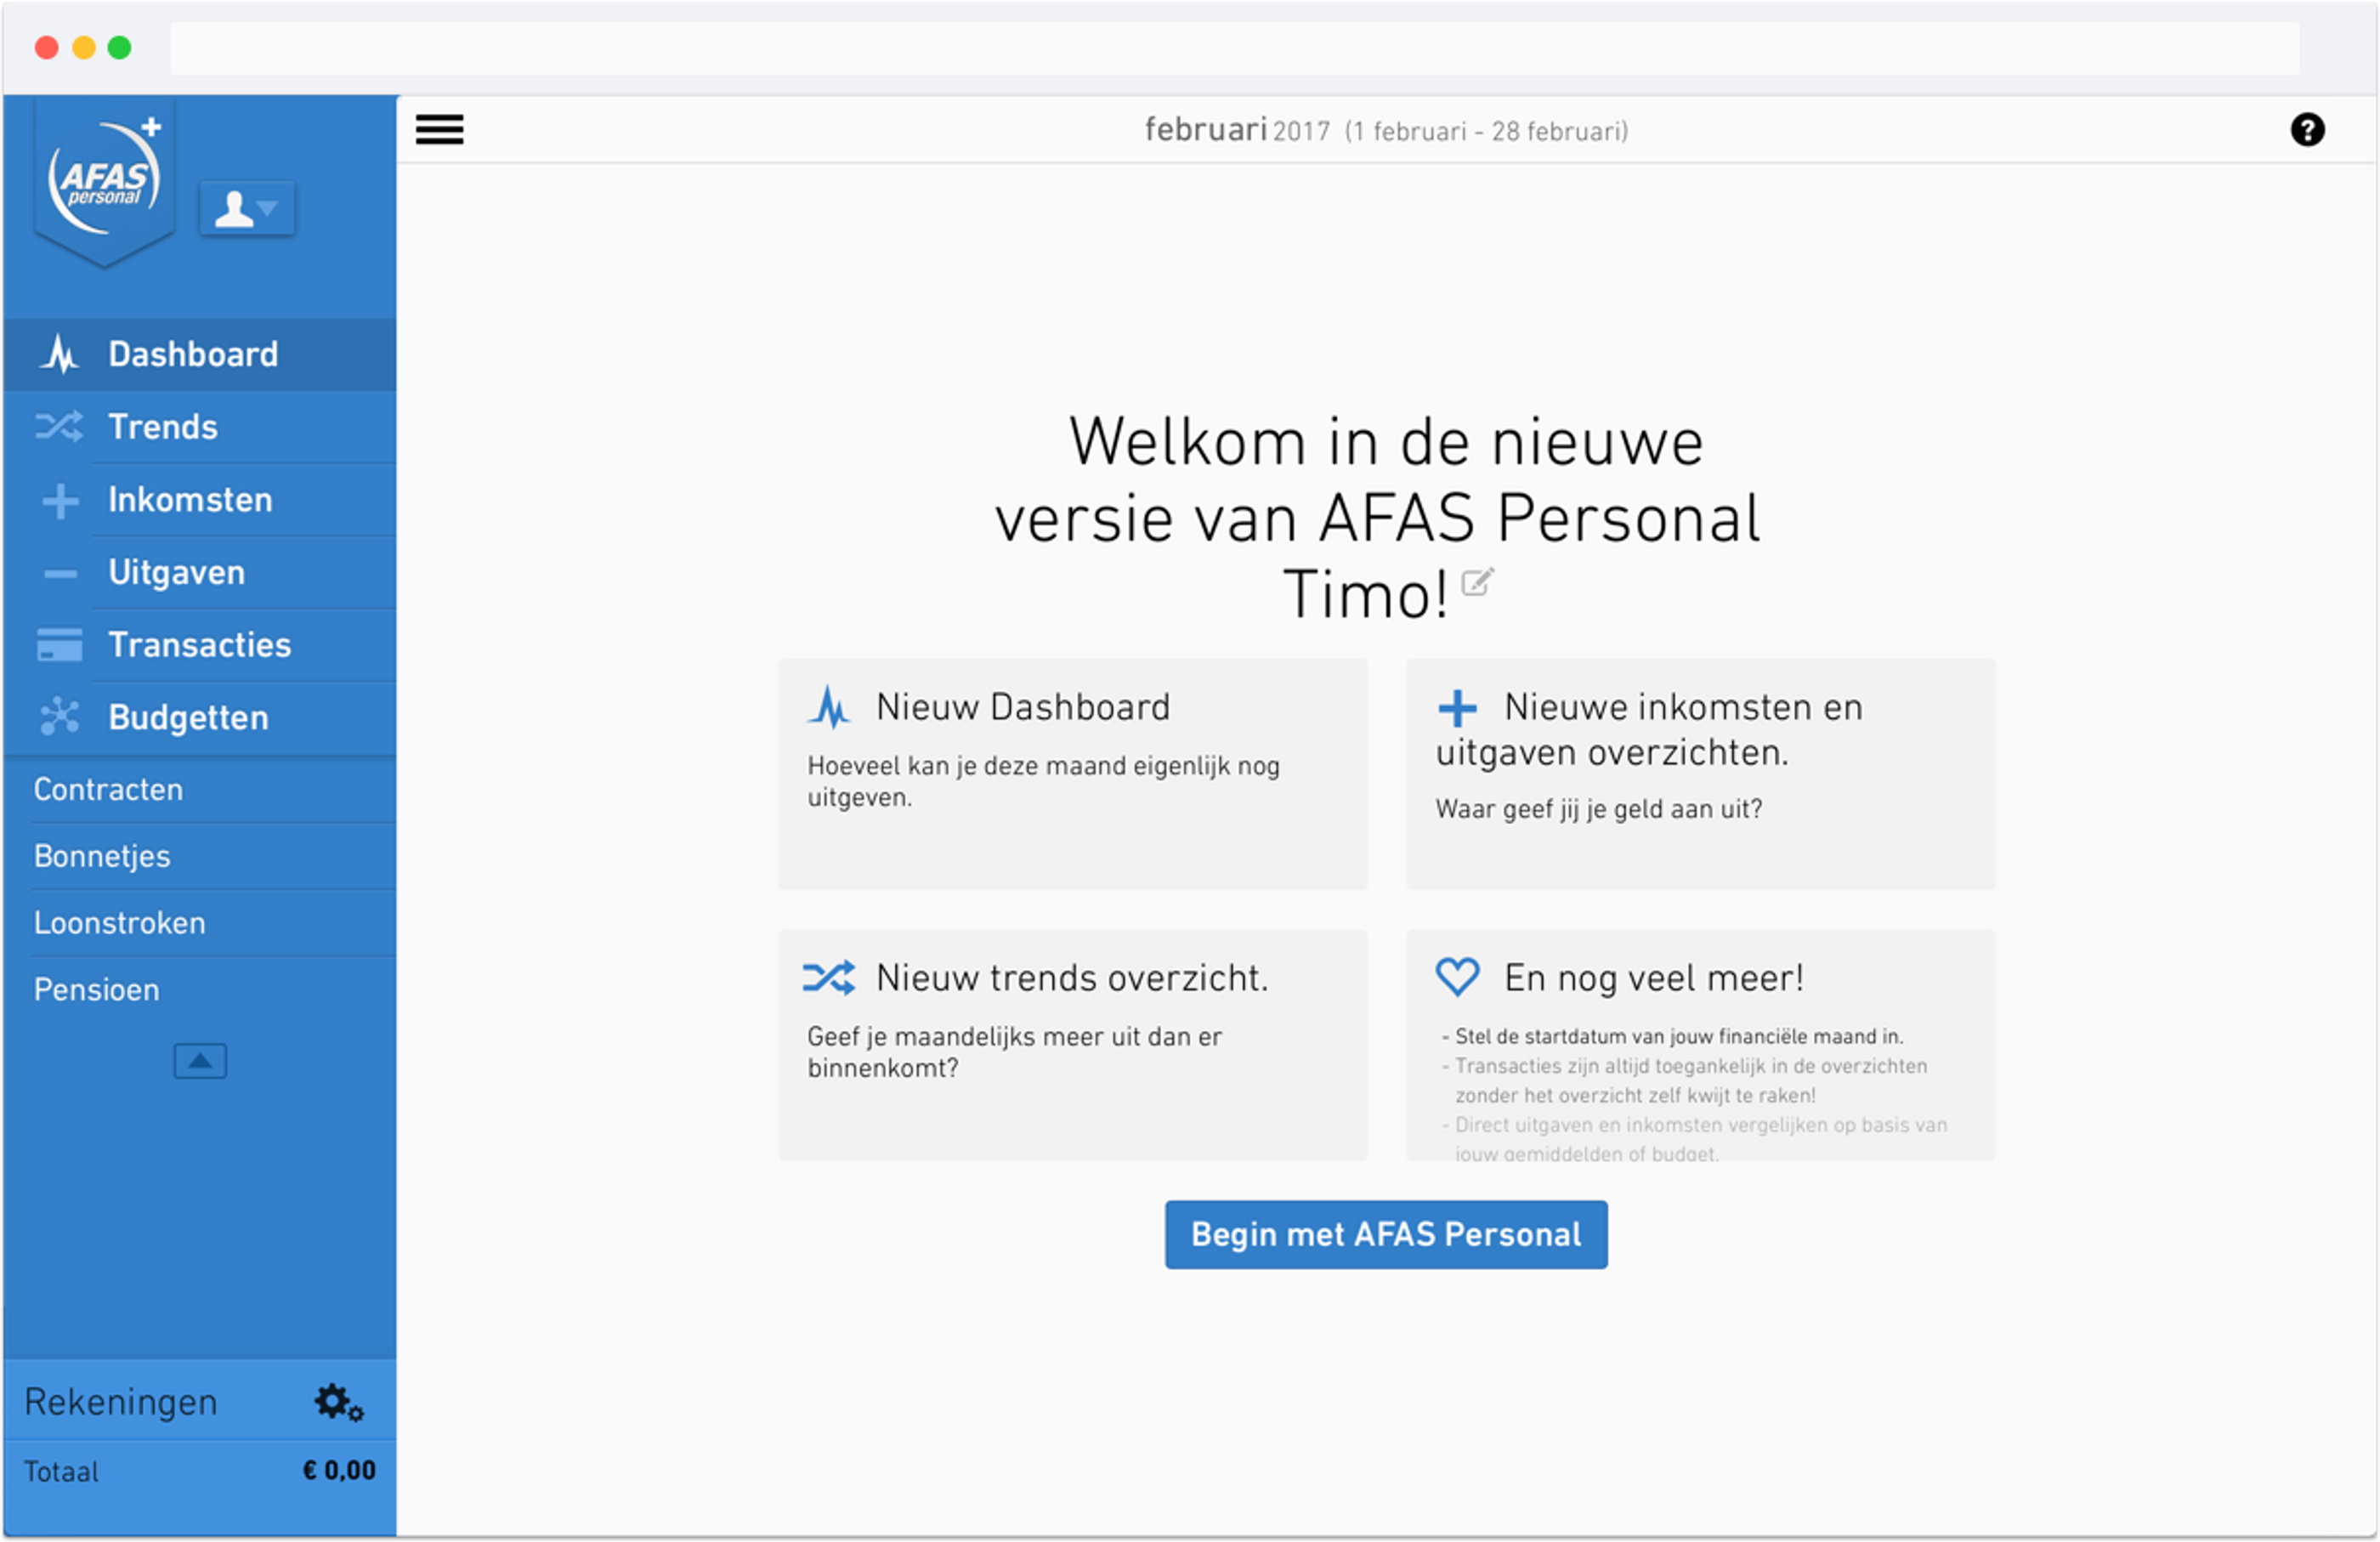 Digital product design and front-end engineering for AFAS Personal